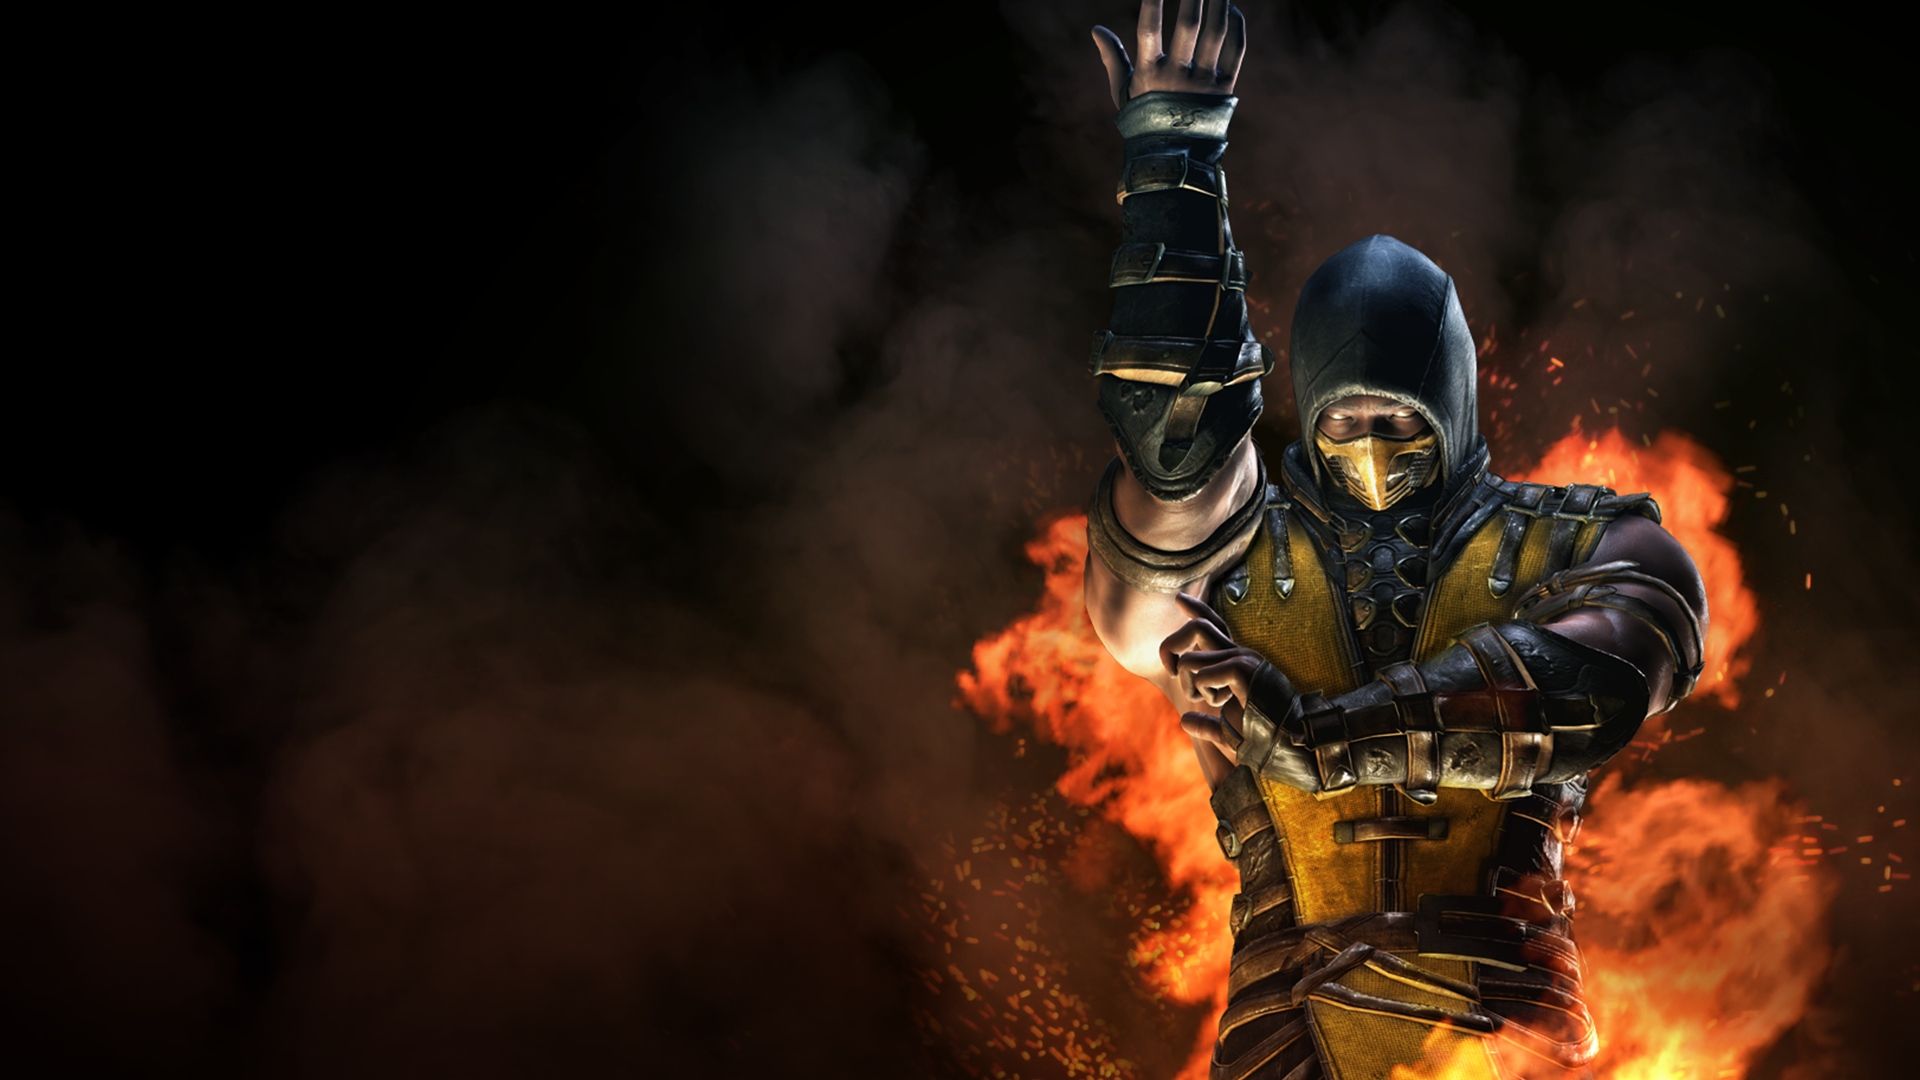 Scorpion Character Mortal Kombat Game Poster Fire Video Game Warriors Video Games 1920x1080